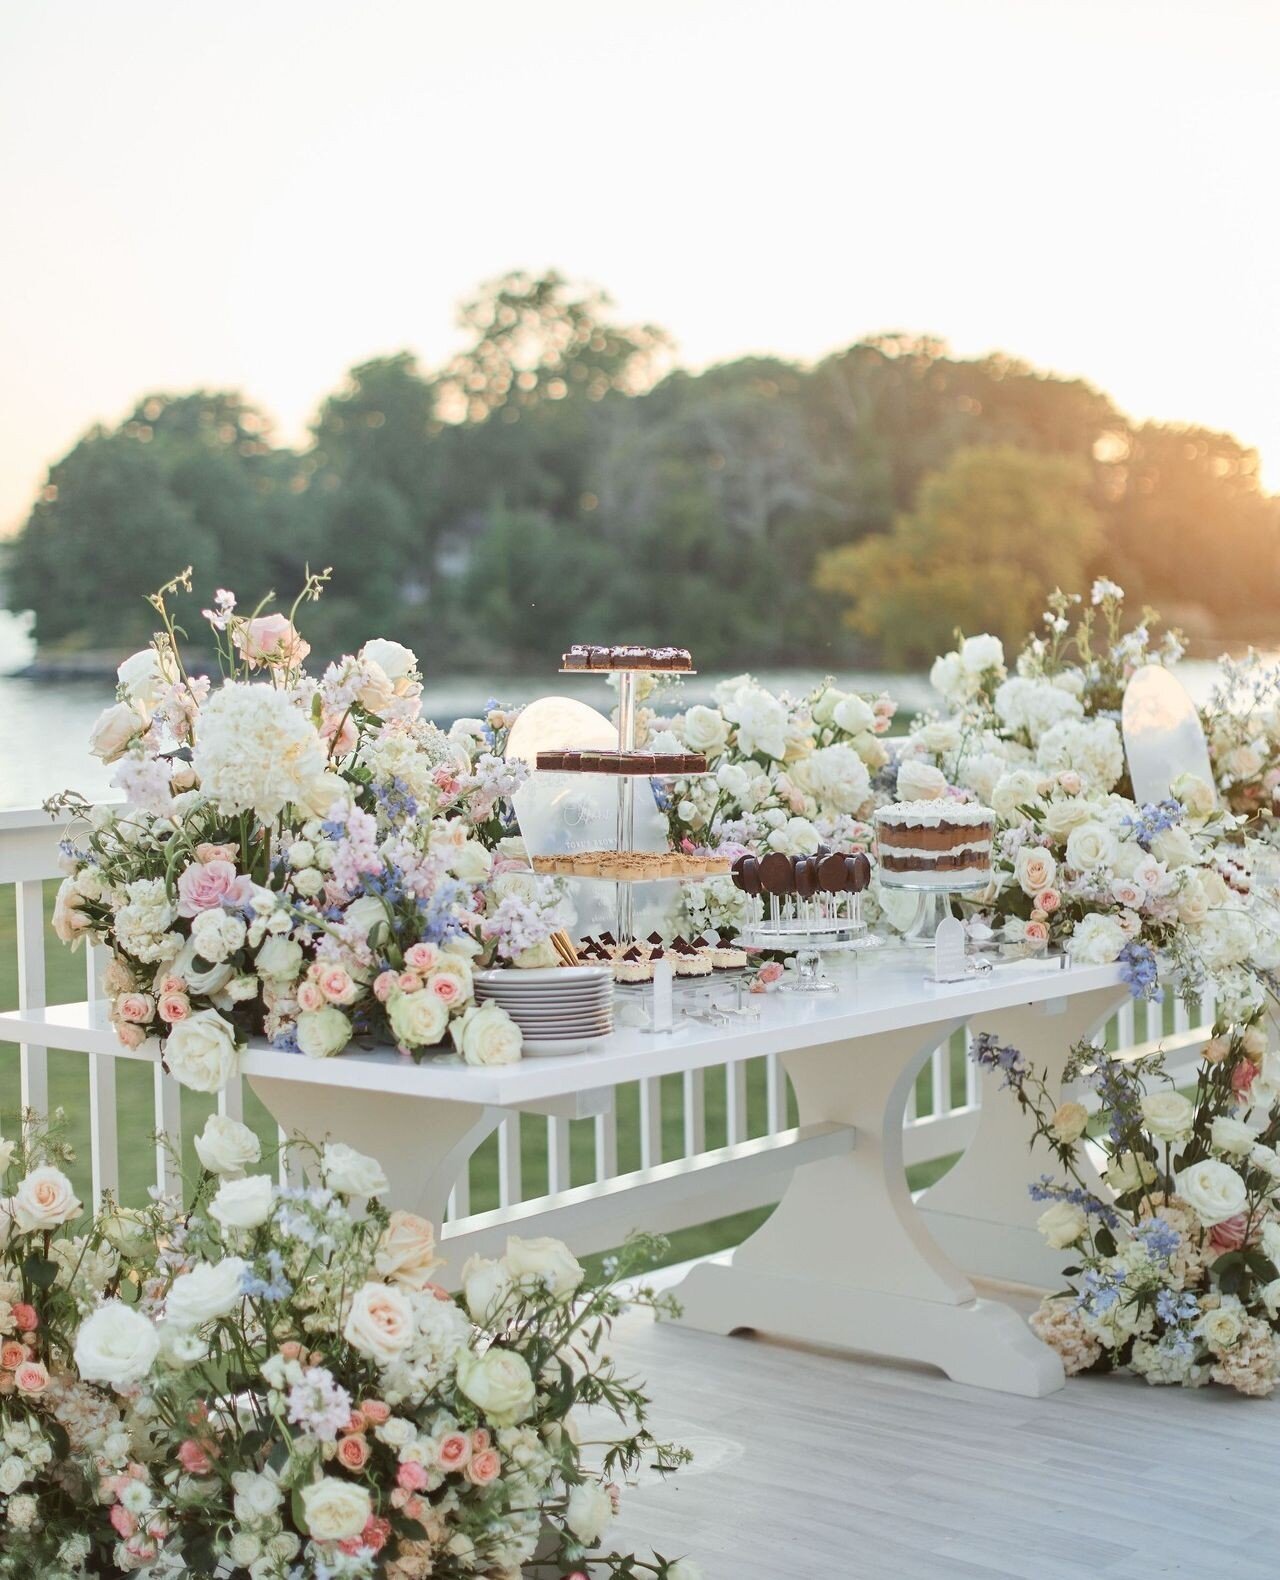 ⁠The view of the Chesapeake Bay is a knockout all on its own, so having it as the backdrop of this rainbow pastel meadow dessert display was a gift! The sunset left a soft golden illumination as the desserts took their place for the sweetest end to t